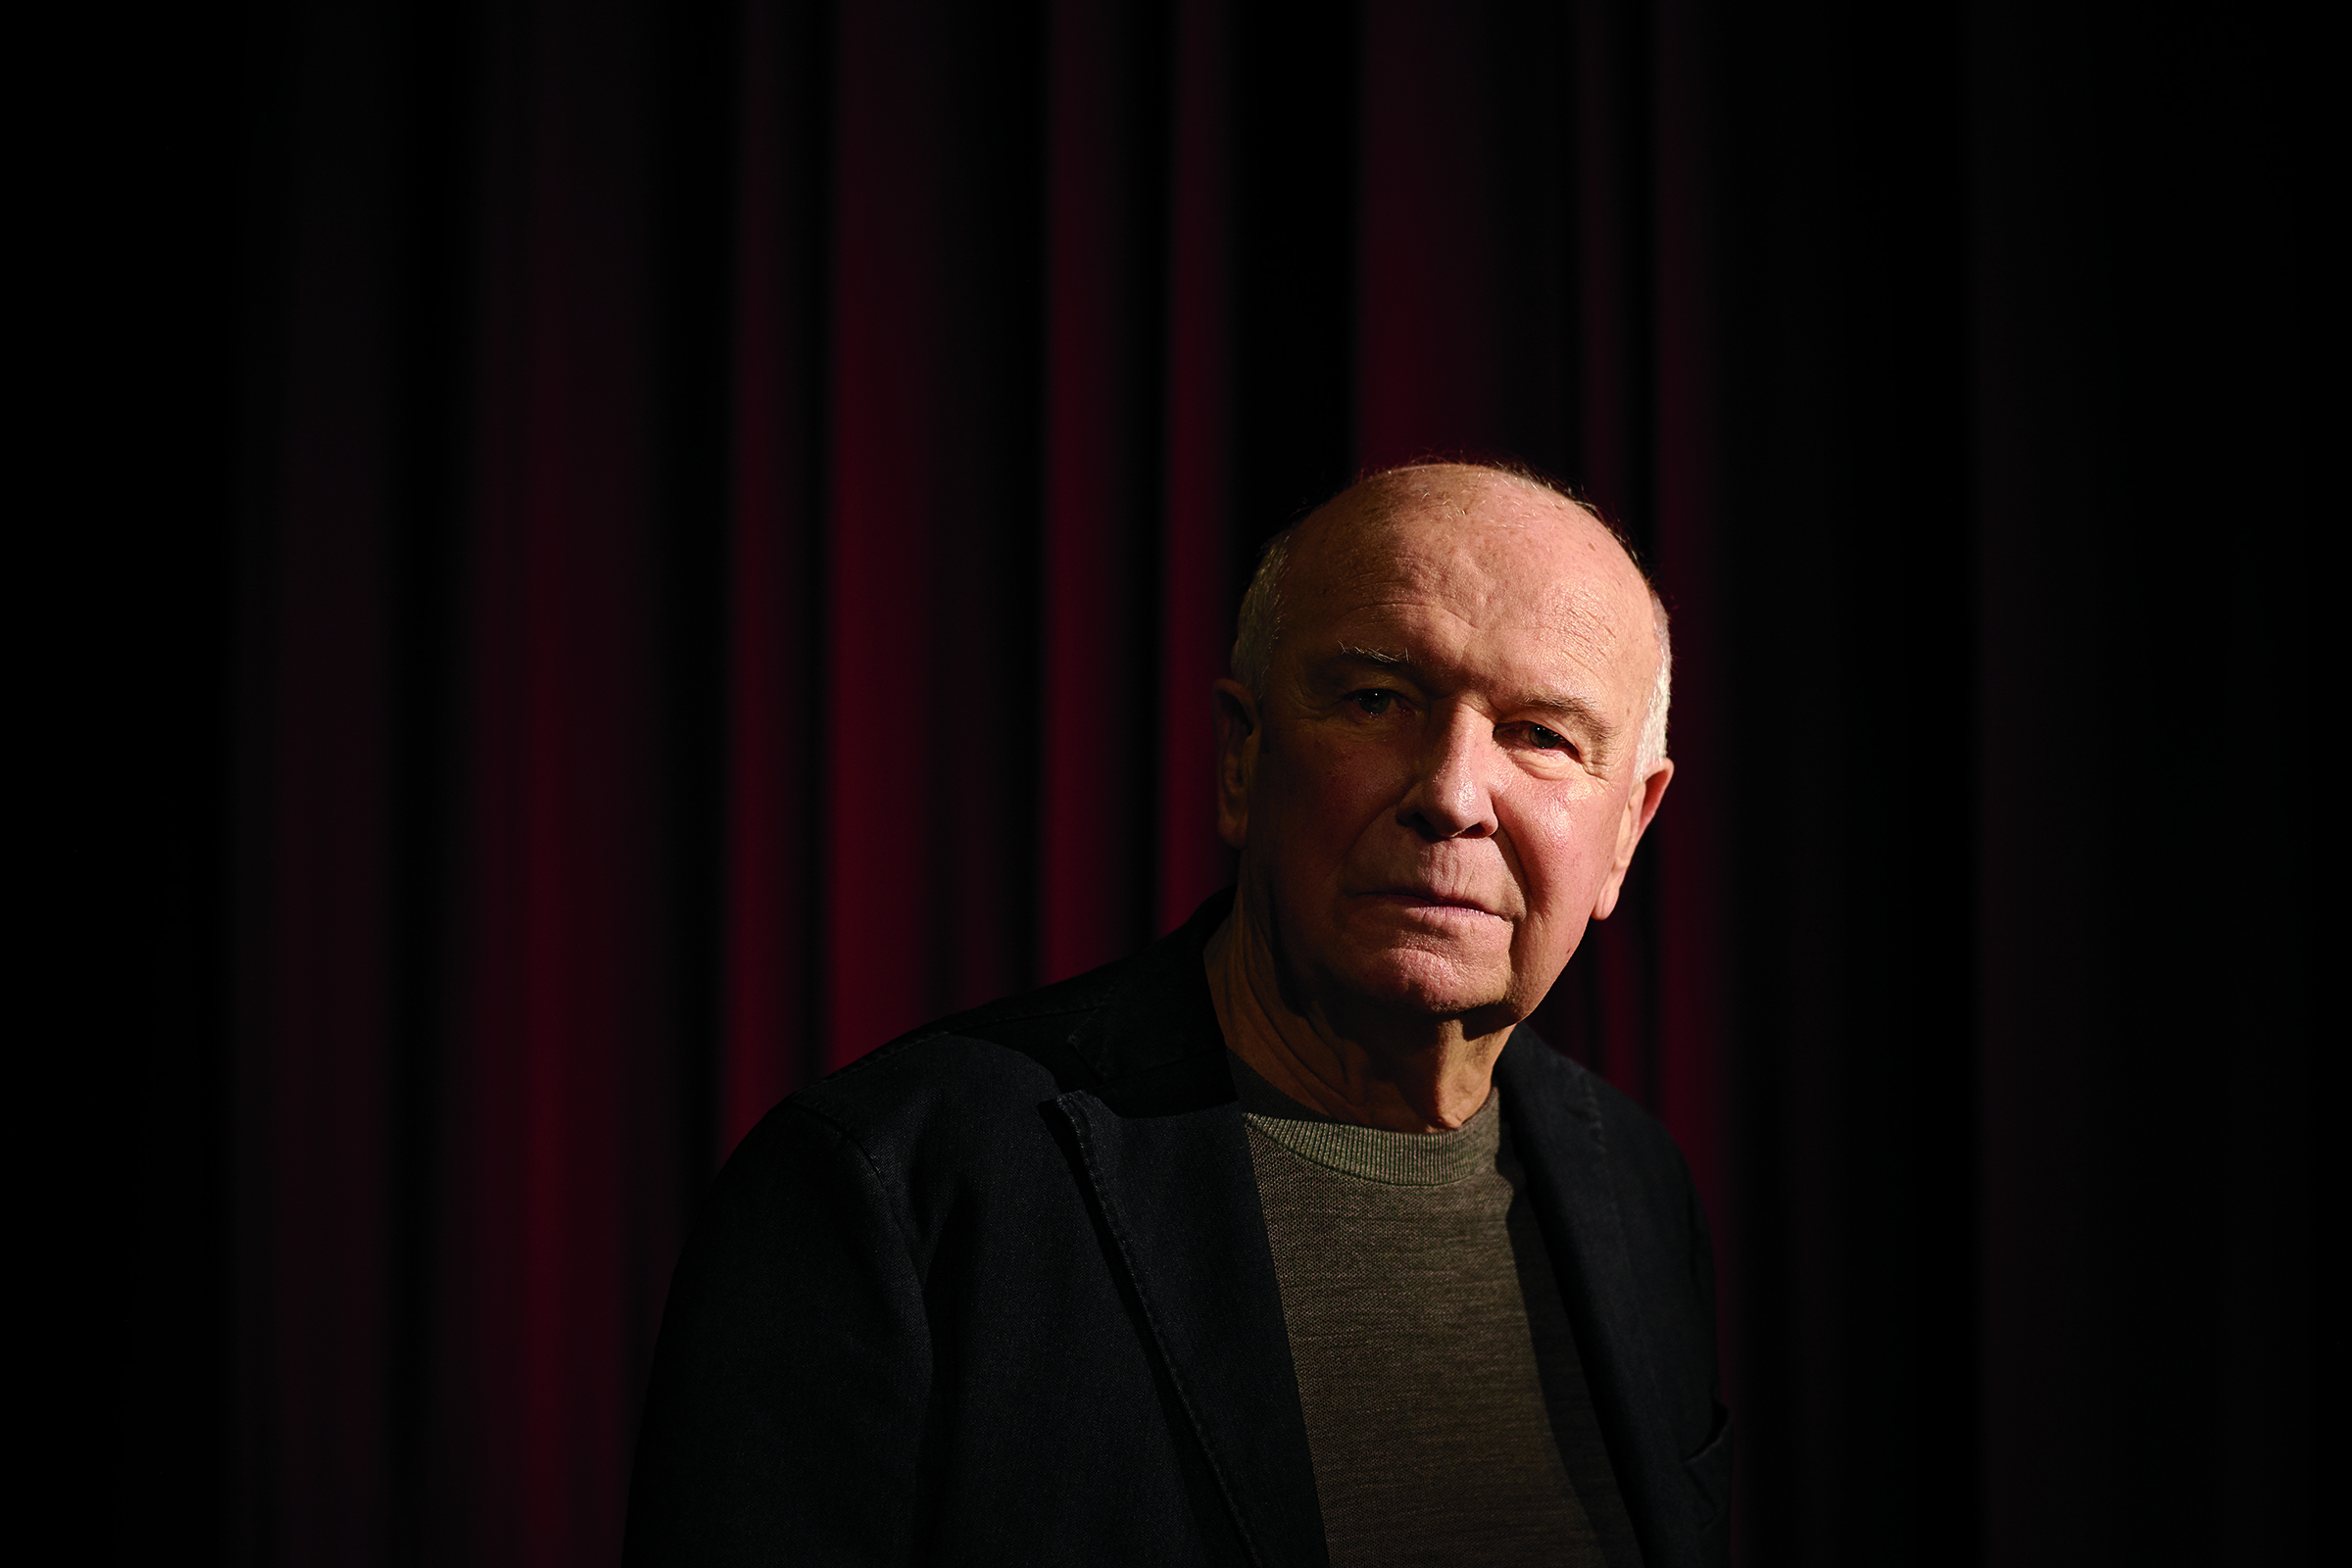 Playwright Terrence McNally who wrote the book for the musical 